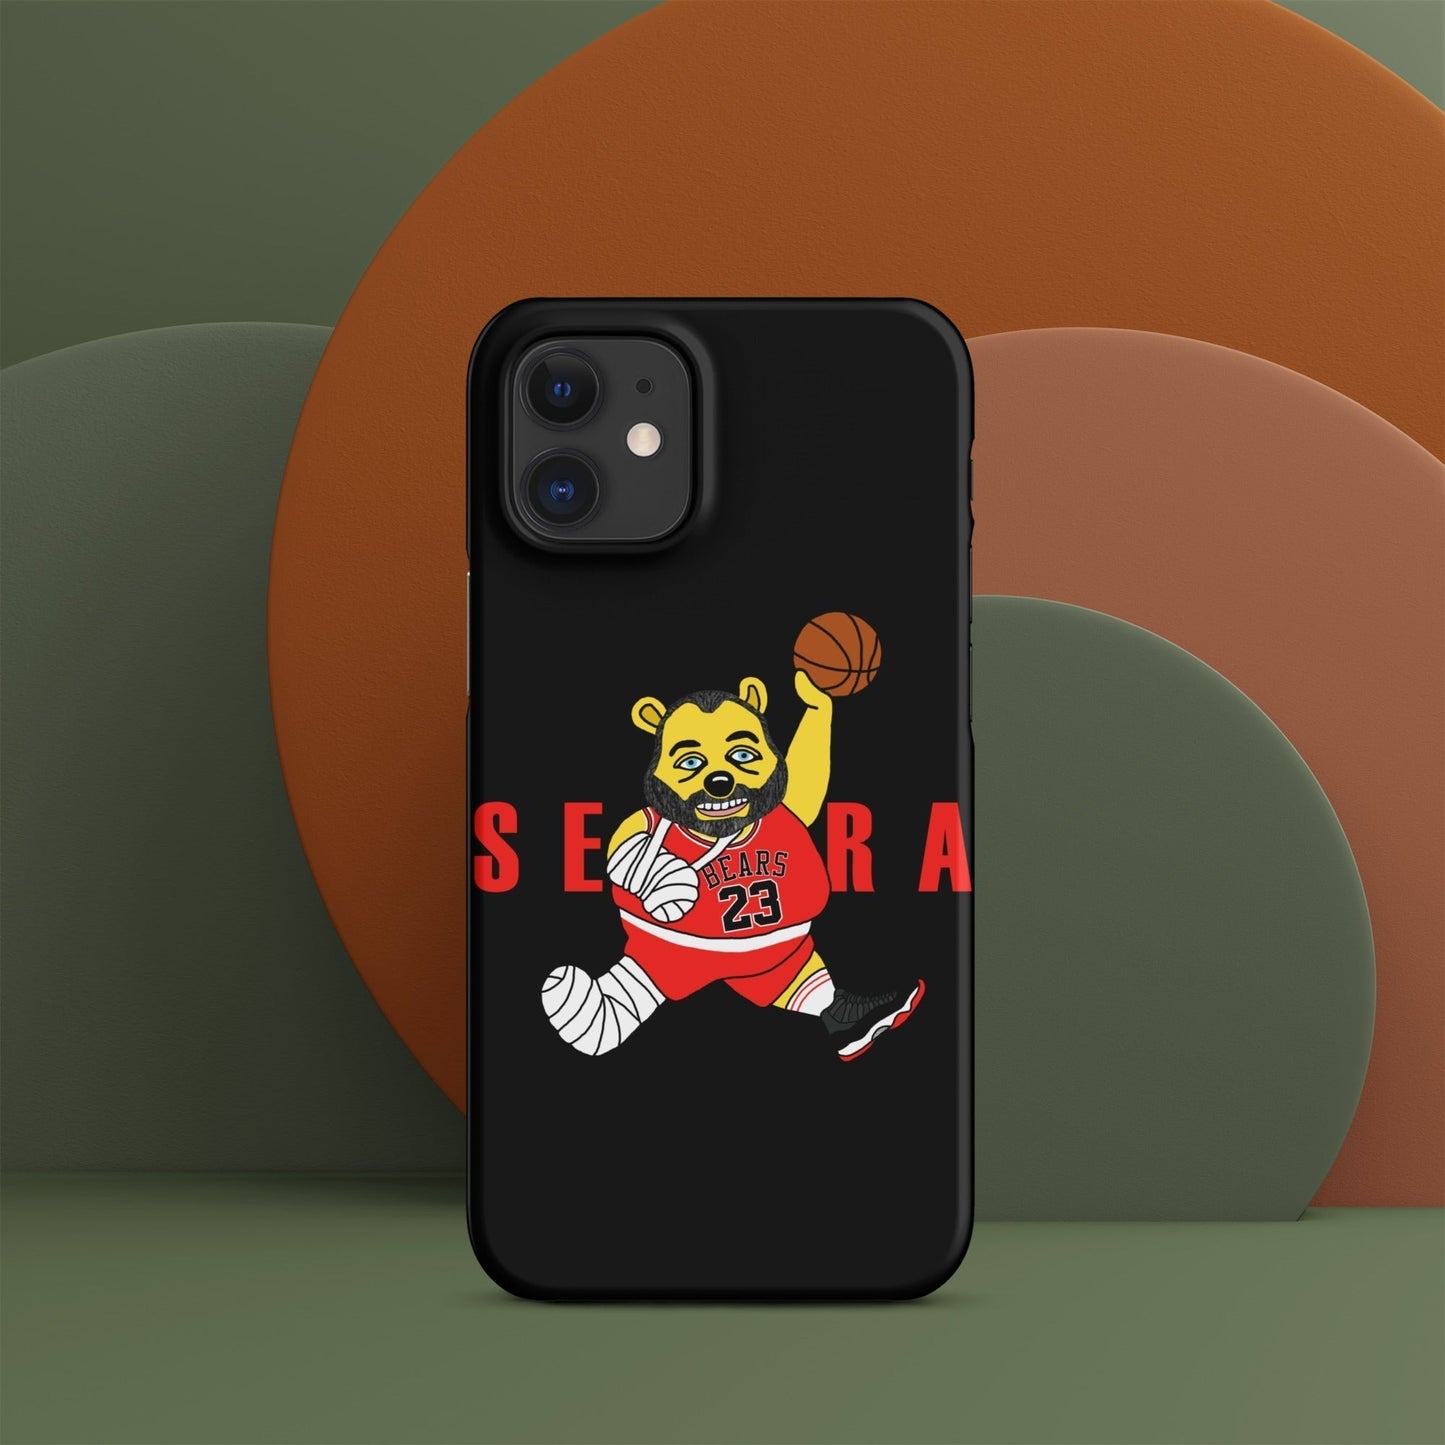 Air Segura, Tom Segura Basketball, Your Mom's House (YMH), 2 Bears 1 Cave, Funny Snap case for iPhone Next Cult Brand 2 Bears 1 Cave, Air Segura, Podcasts, Stand-up Comedy, Tom Segura, YMH